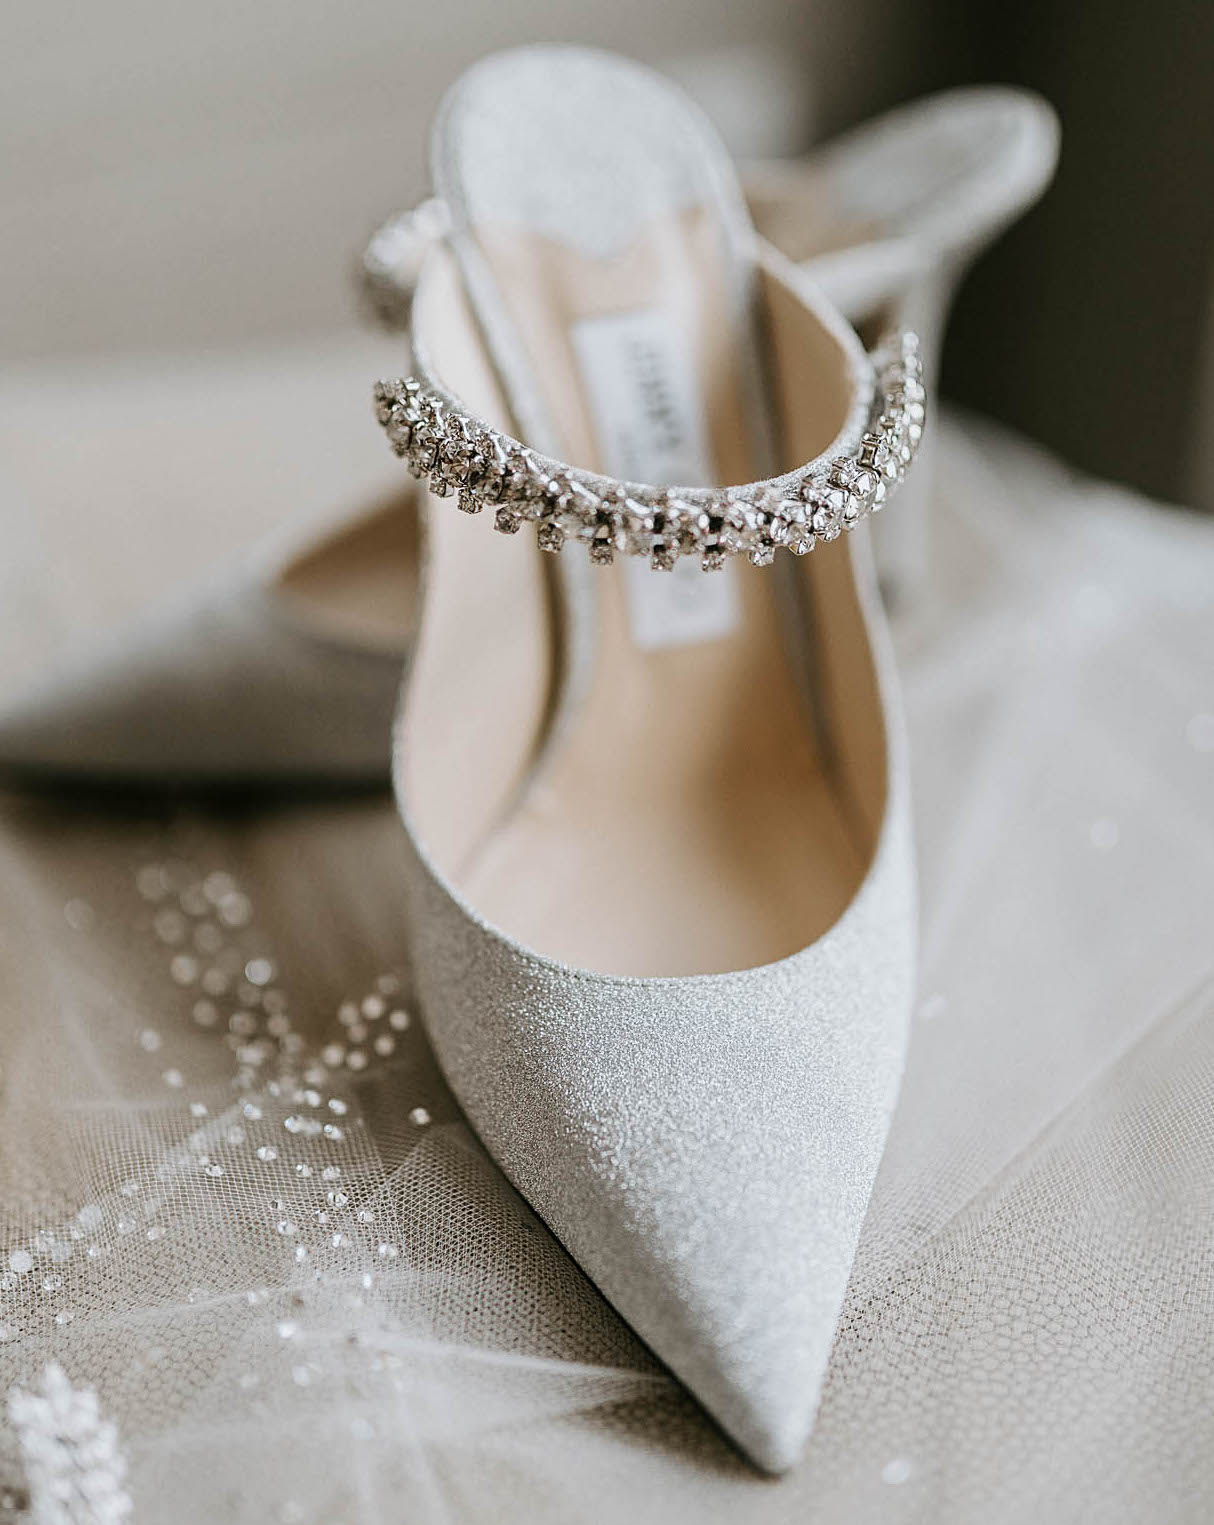 The bride's sparkling shoes have a pointed toe and a crystal-embellished strap.